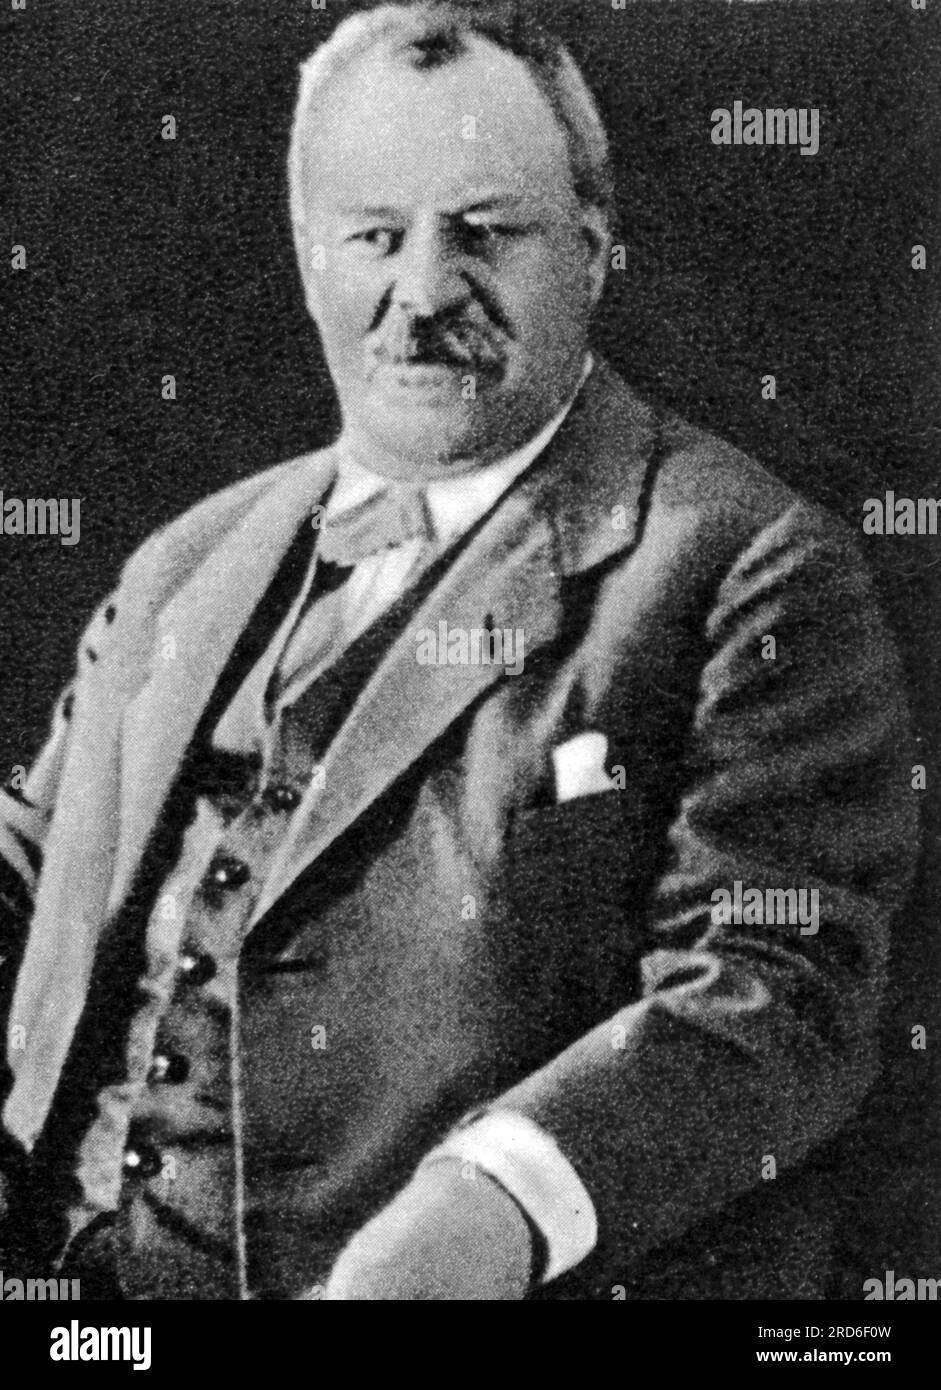 Wtorow, Nikolay Alexandrowitsch, 27.4.1866 - 20,5.1918, russischer Industrielle, ca. 1910, ADDITIONAL-RIGHTS-CLEARANCE-INFO-NOT-AVAILABLE Stockfoto